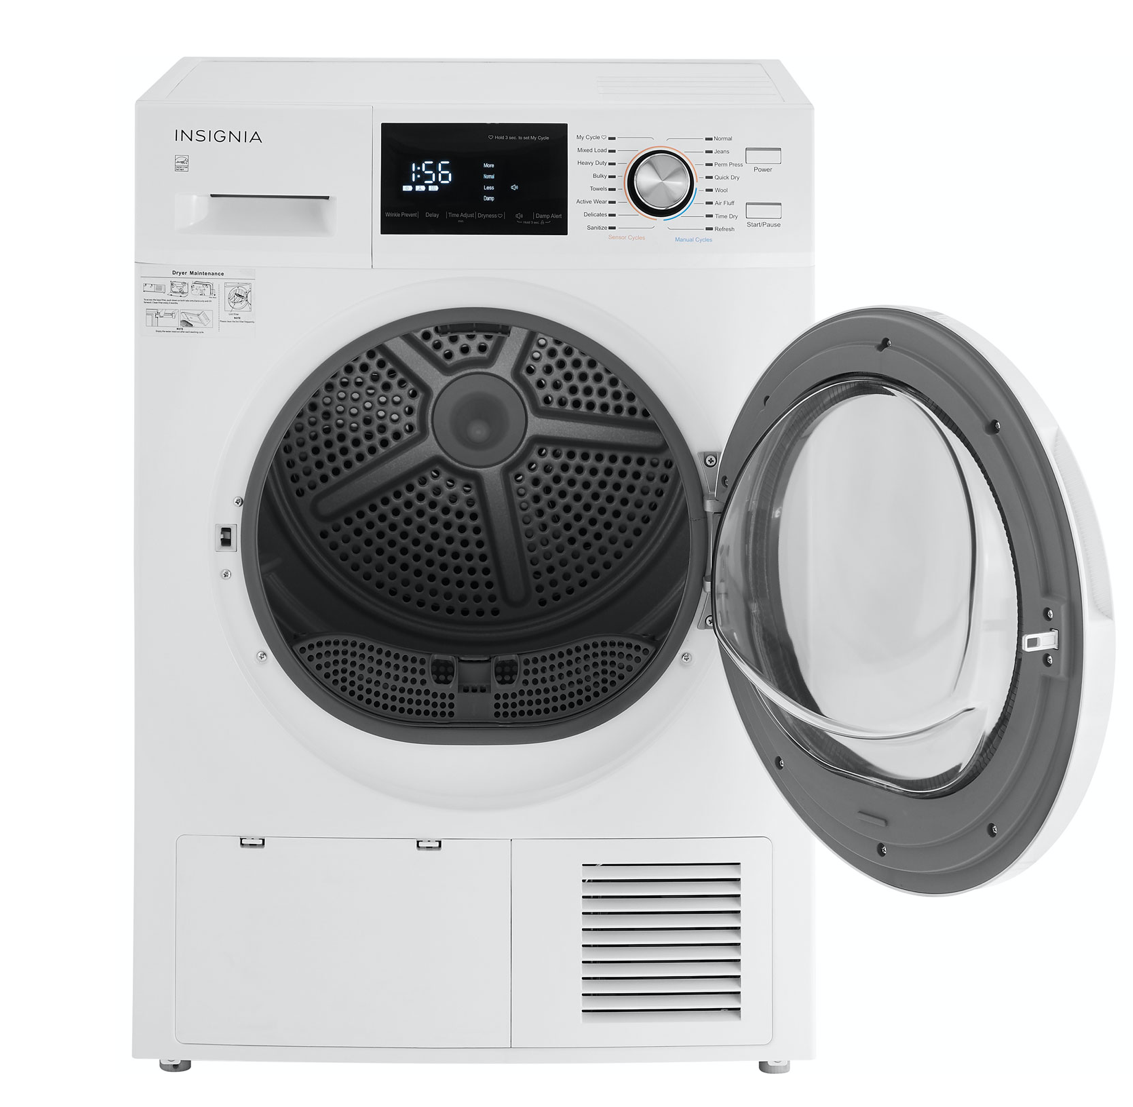 front of the Insignia electric dryer